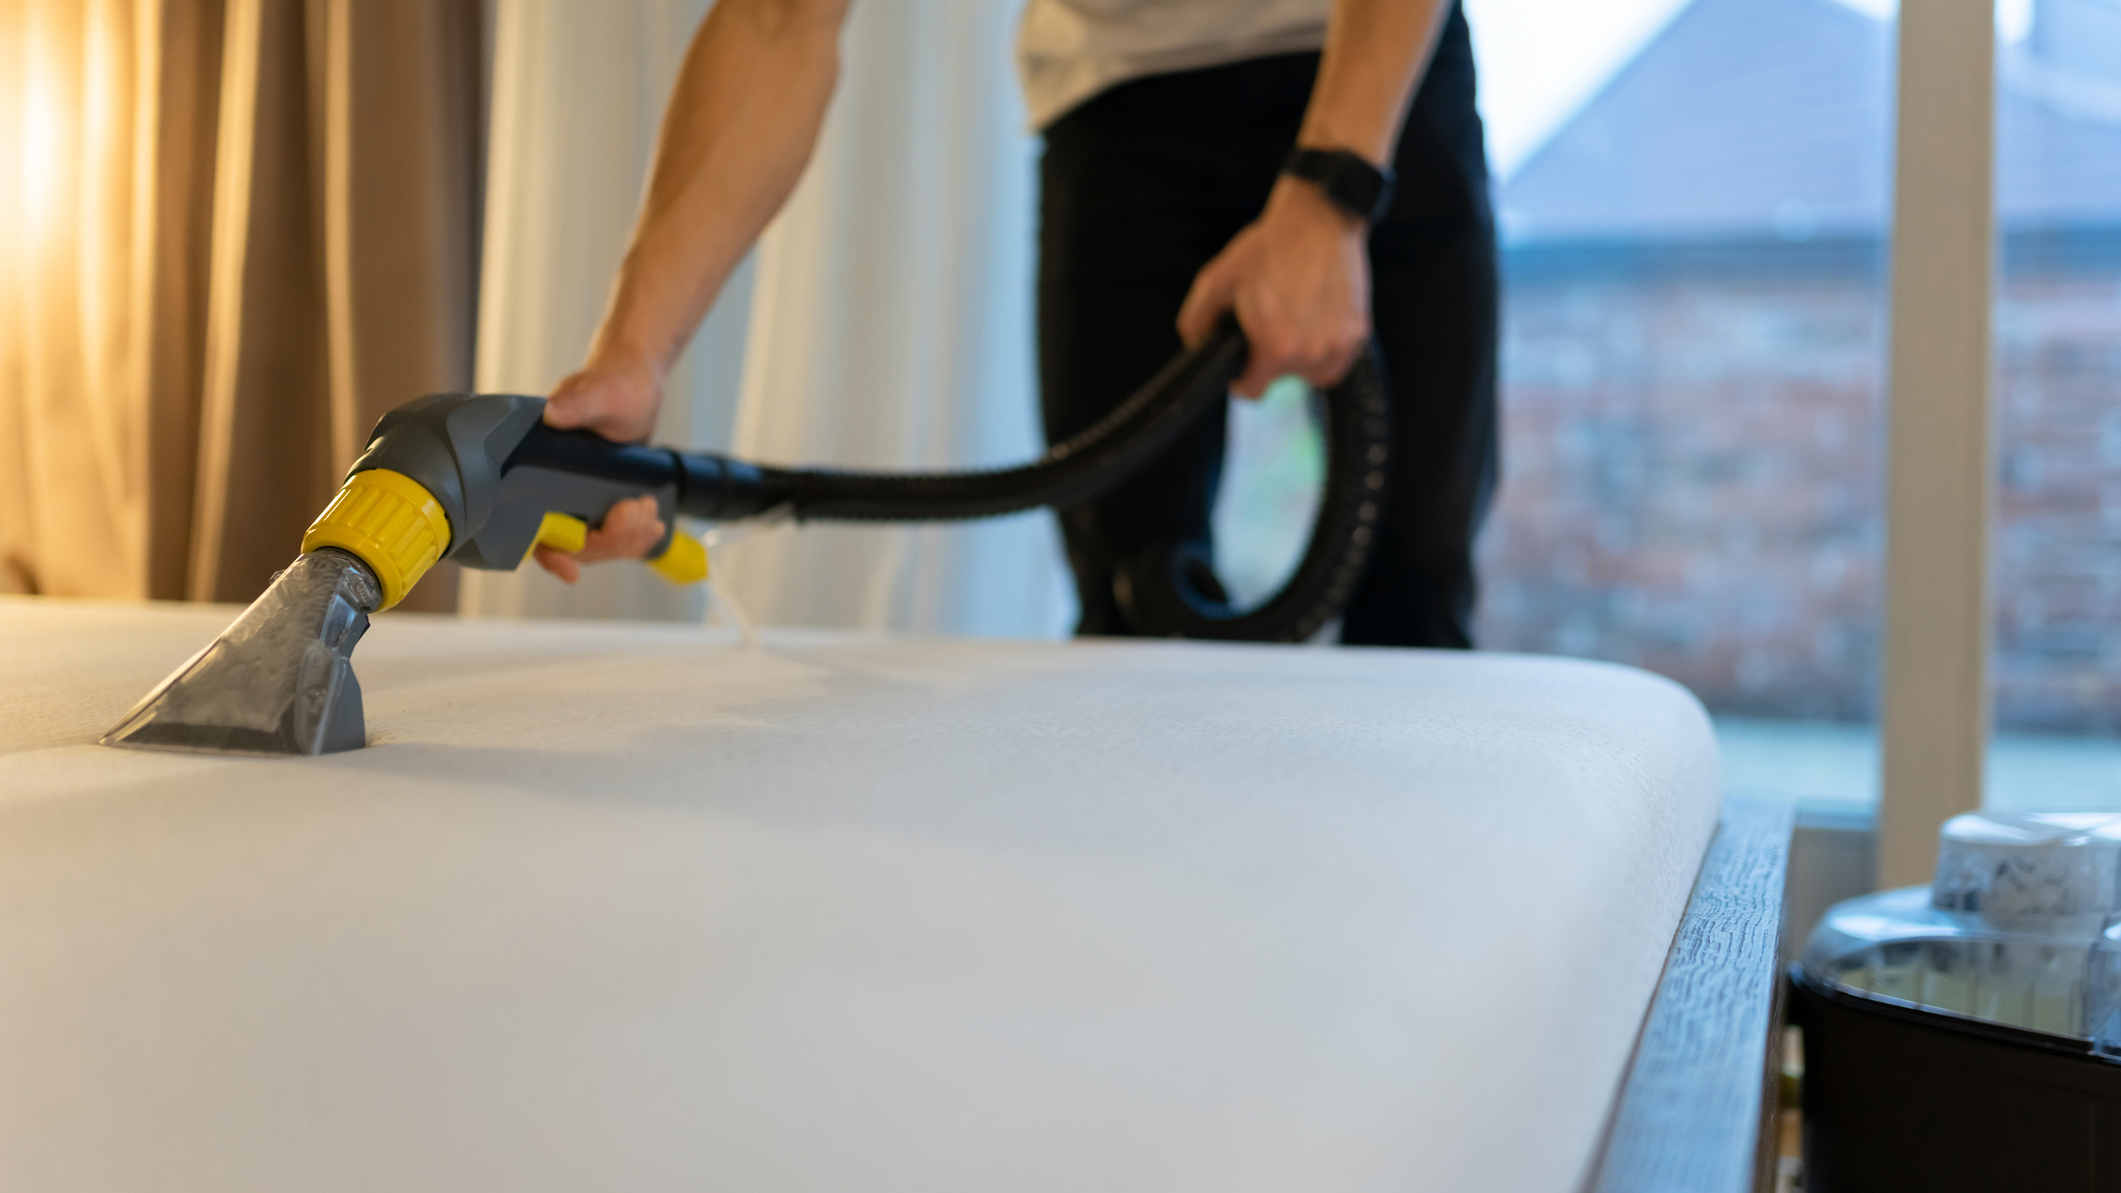 A man cleans a mattress using a handheld vacuum cleaner